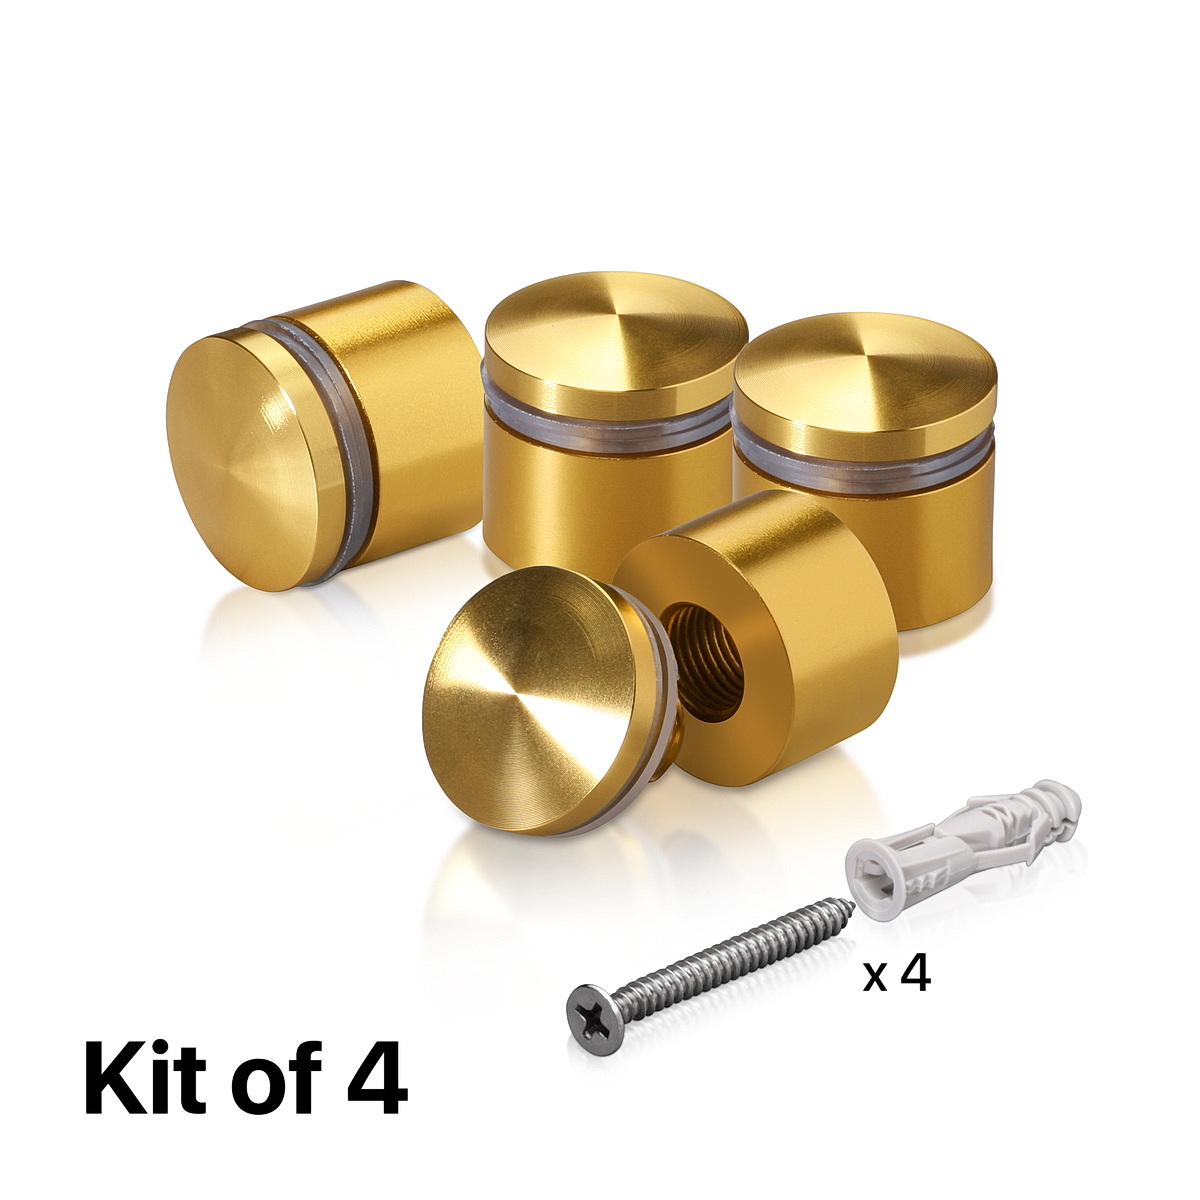 (Set of 4) 7/8'' Diameter X 1/2'' Barrel Length, Aluminum Rounded Head Standoffs, Gold Anodized Finish Standoff with (4) 2216Z Screws and (4) LANC1 Anchors for concrete or drywall (For Inside / Outside use) [Required Material Hole Size: 7/16'']